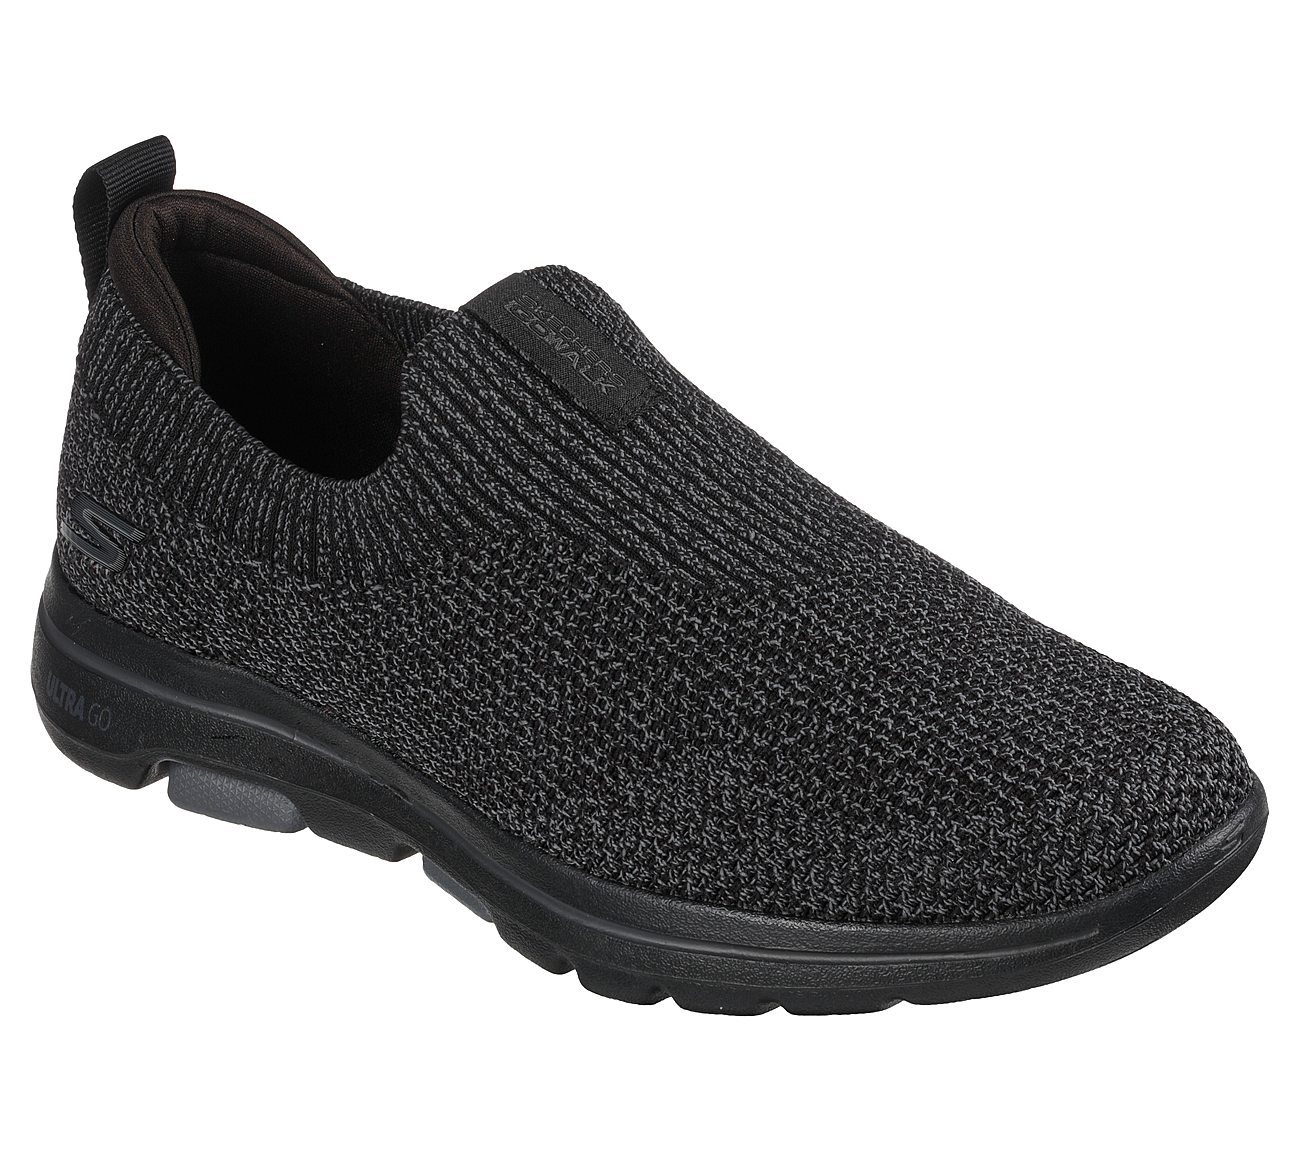 GO WALK 5 - TOWNWAY, BLACK/CHARCOAL Footwear Right View